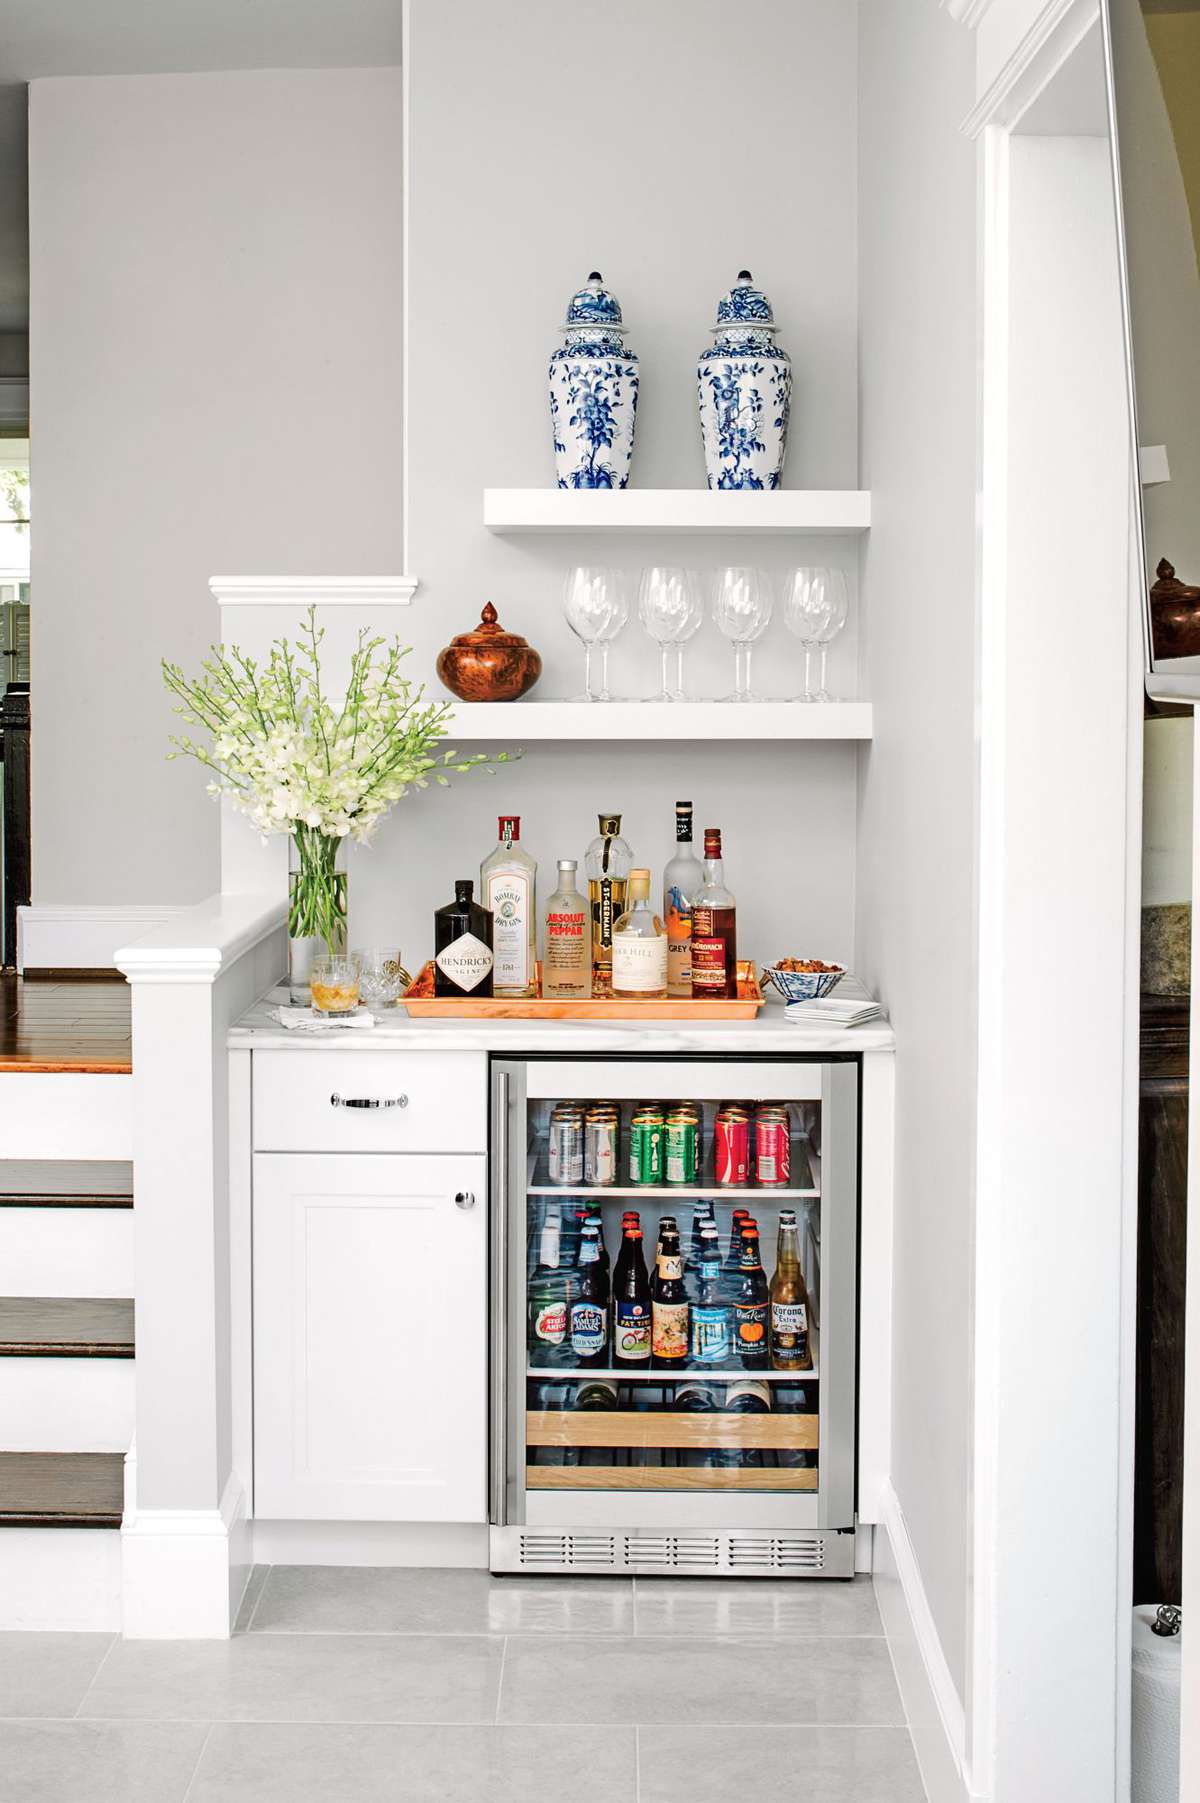 Ideas For Refrigerator And Pantry Short Wall In Kitchen chicago 2021